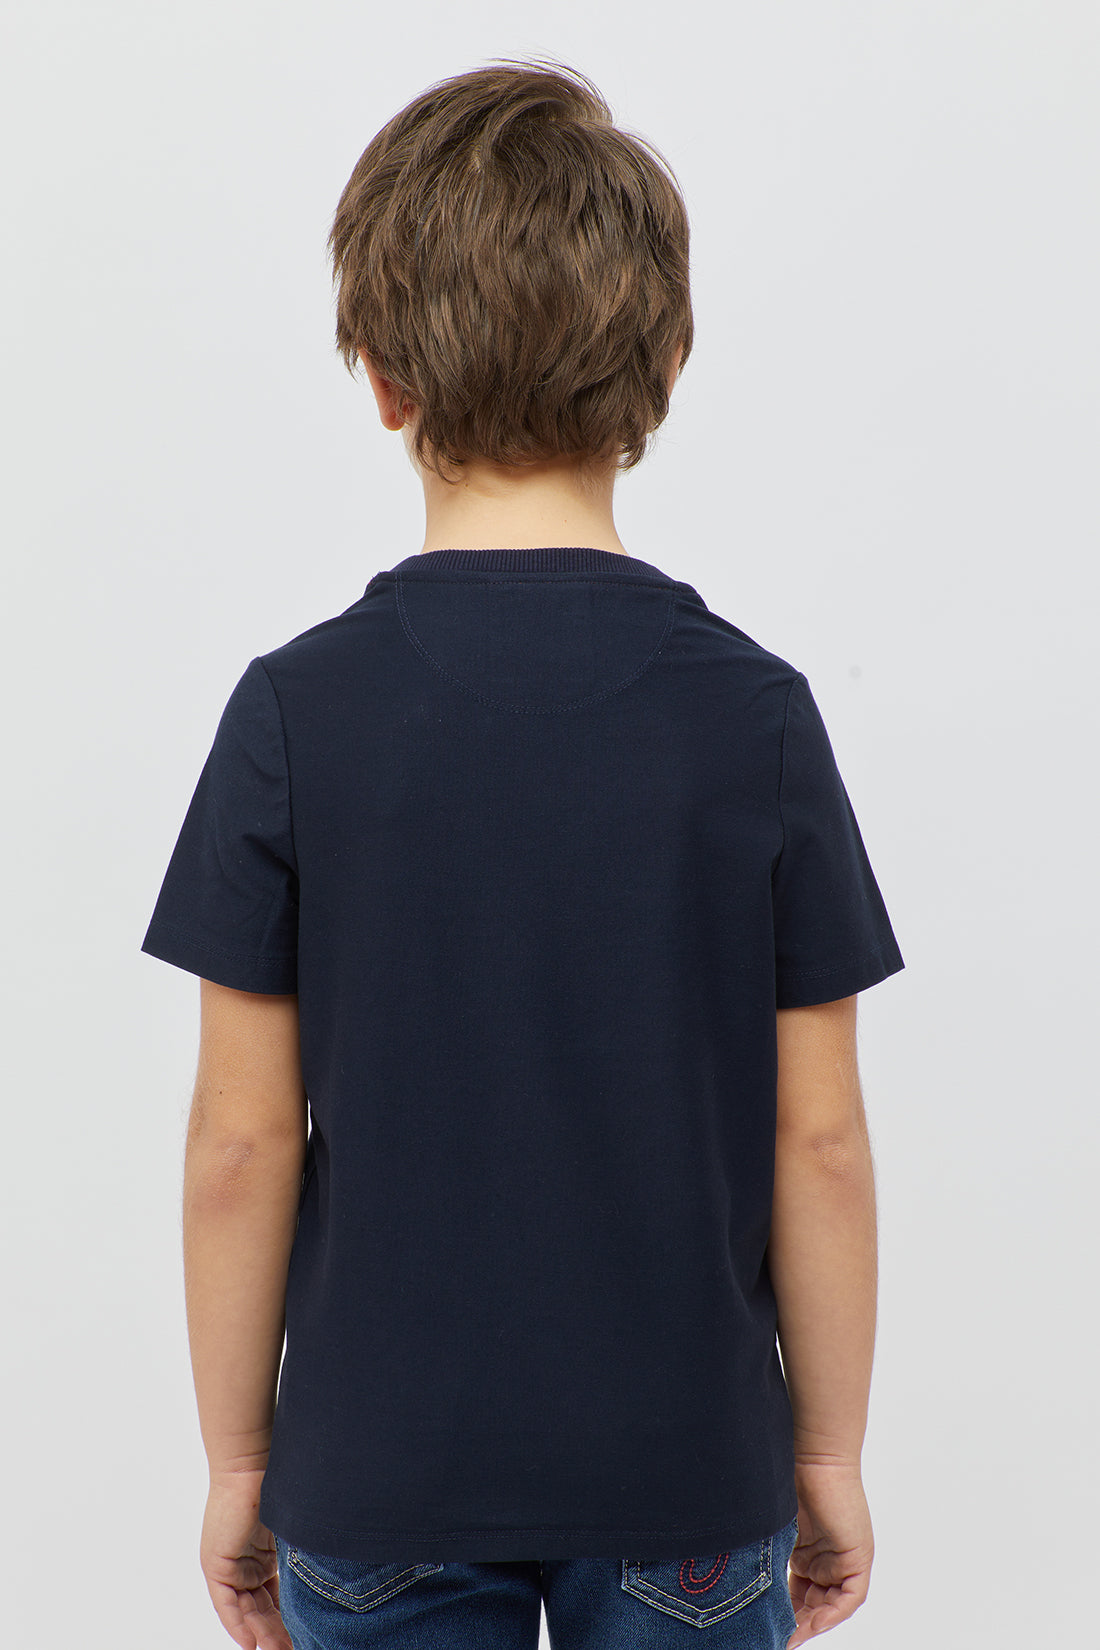 One Friday Printed Navy Blue T-shirt